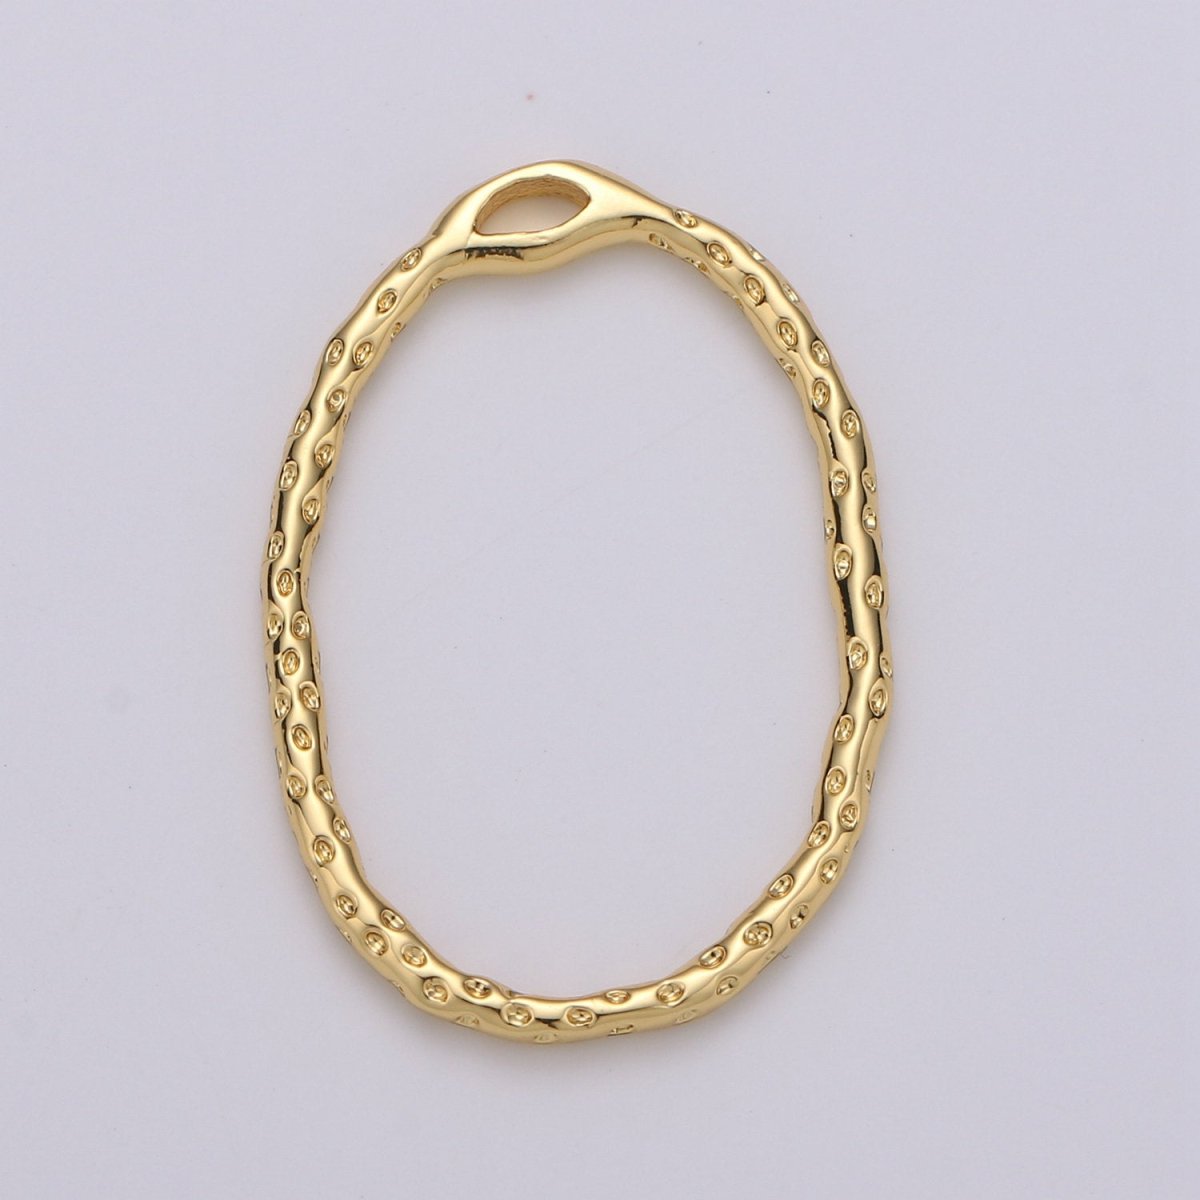 Dainty Hammered Oval Pendant, Round Charm 14k Gold filled for Earring Necklace Supply K-898 - DLUXCA